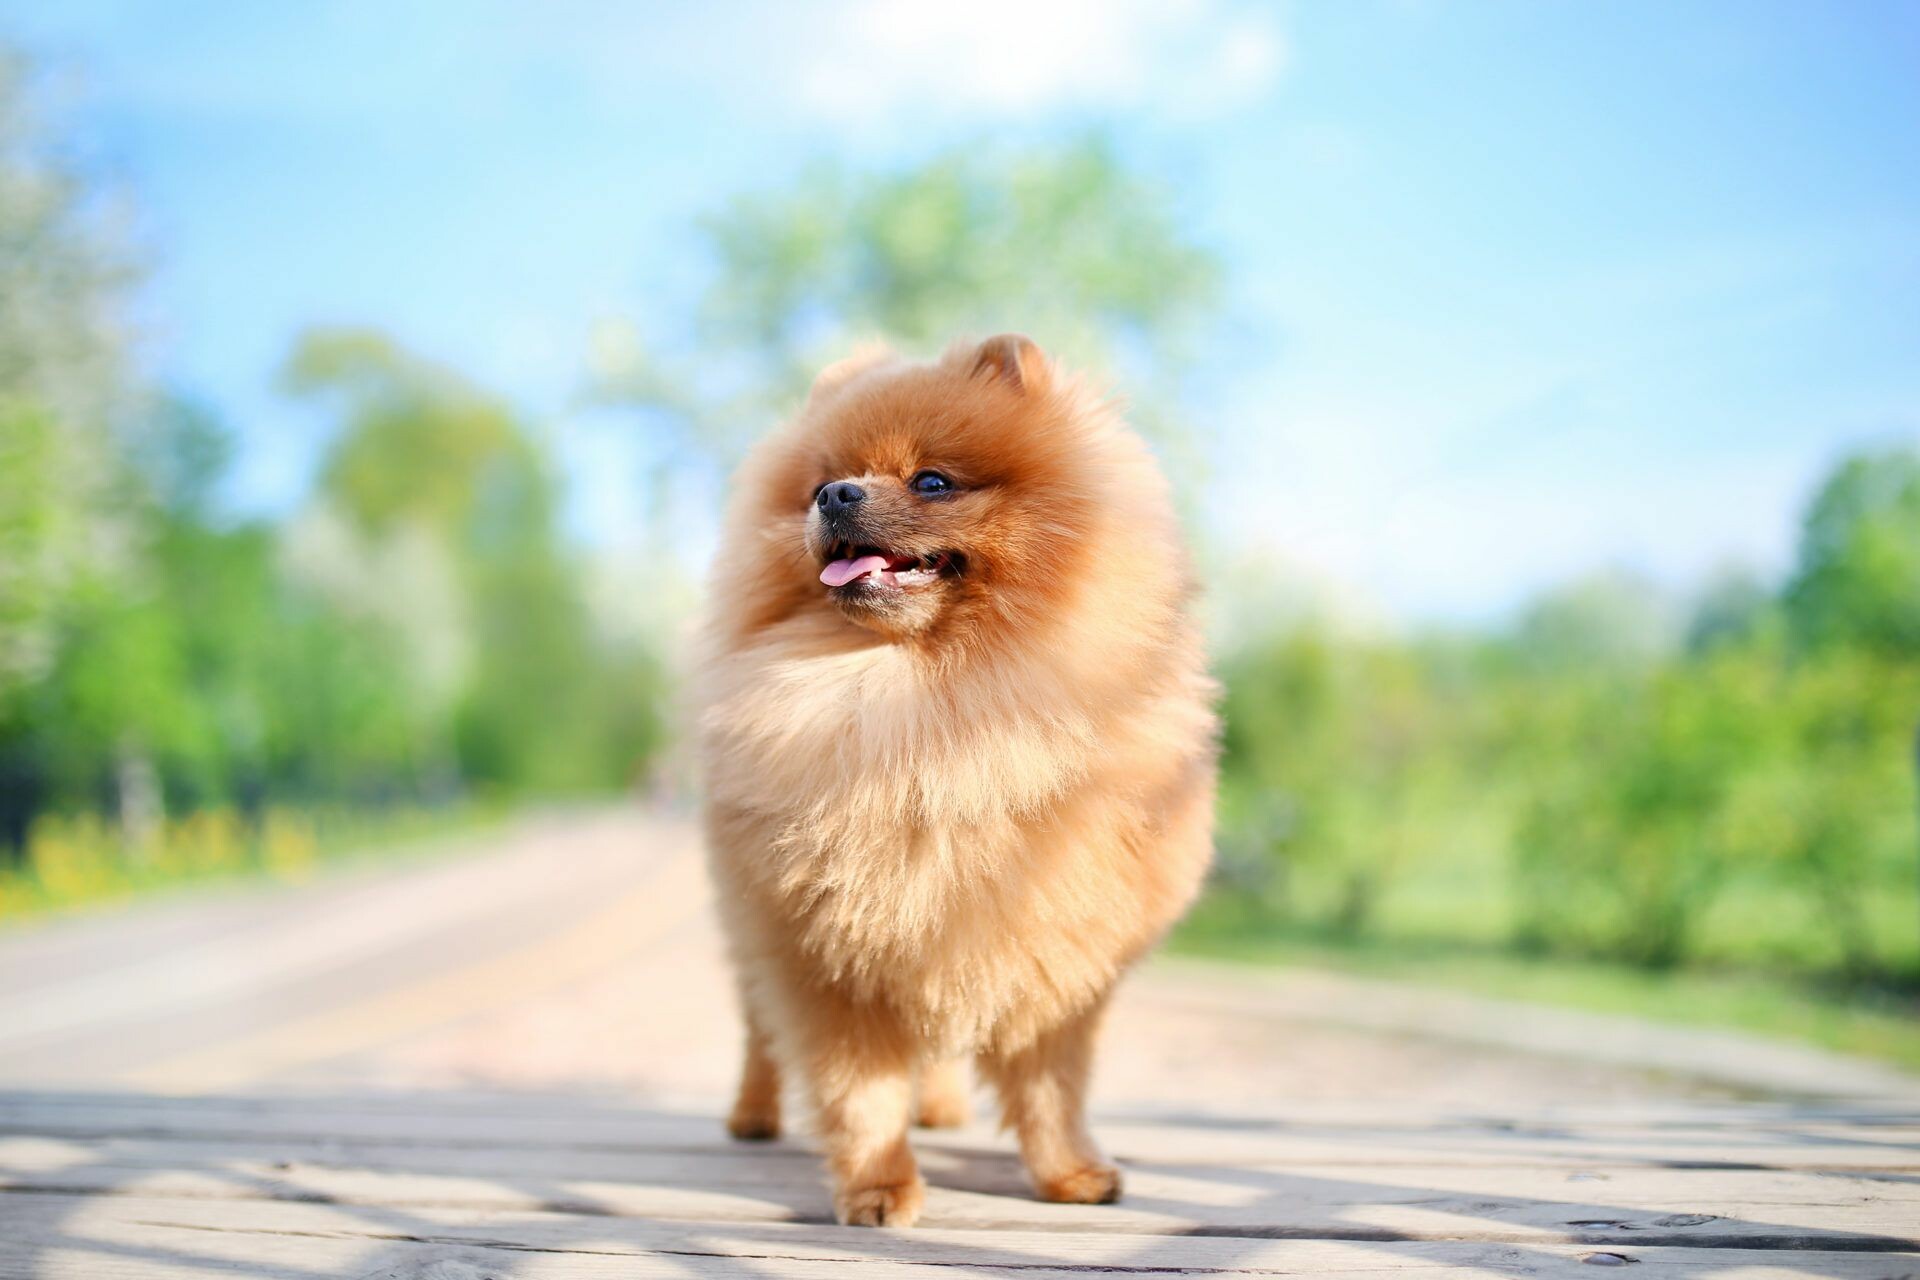 Pomeranian: Puppy, A breed of toy dog known as a Pom. 1920x1280 HD Wallpaper.